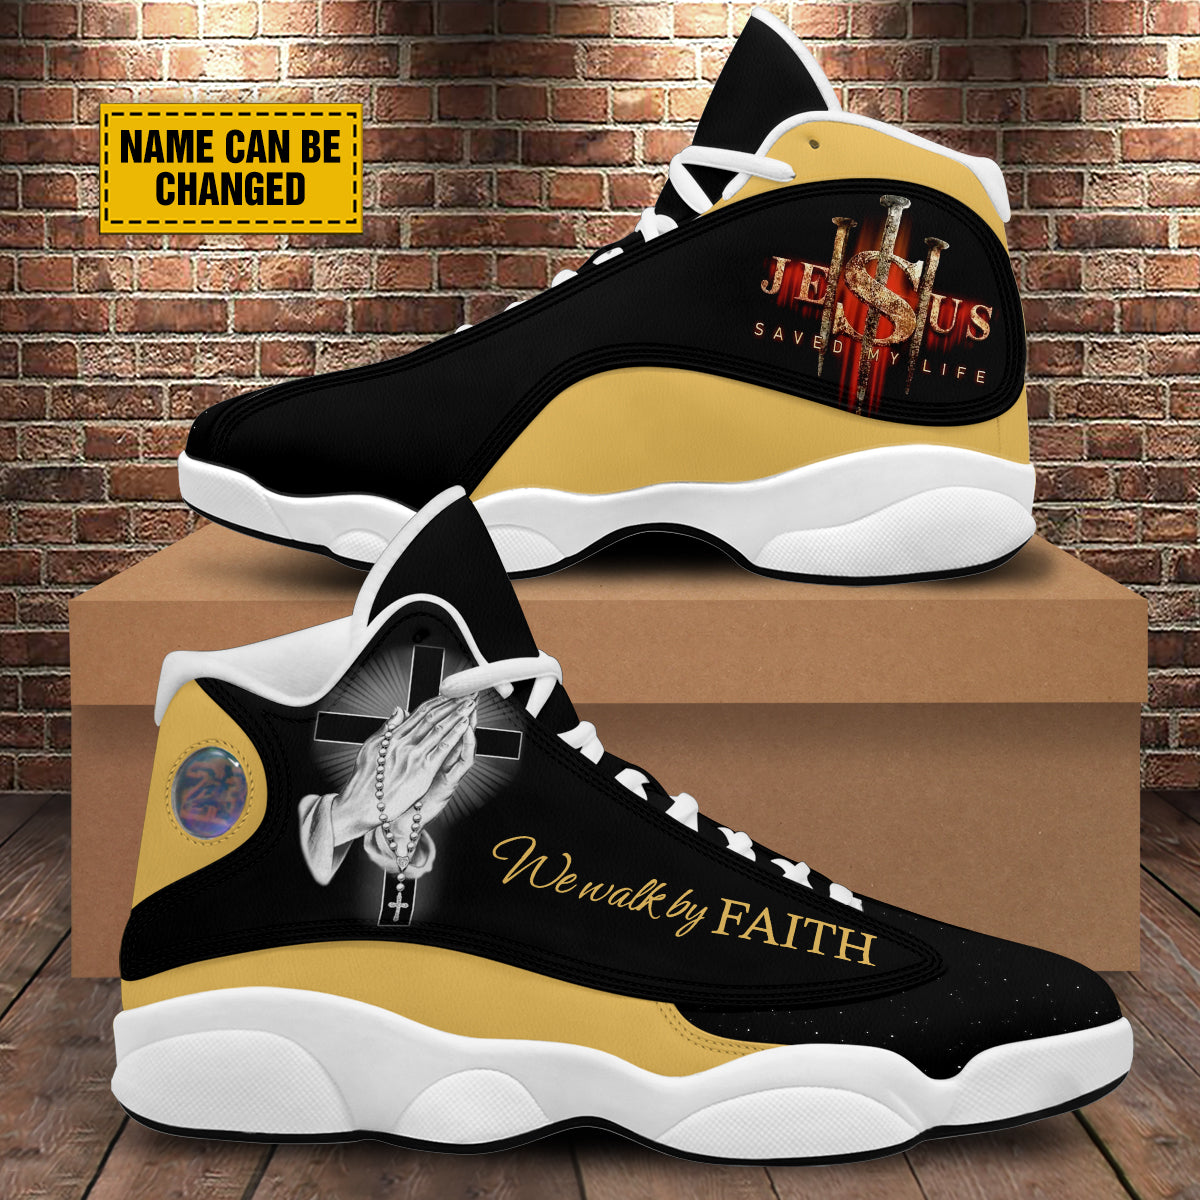 Teesdily | Personalized We Walk By Faith Basketball Shoes, Hands Praying God Shoes, Christian Footwear Unisex Basketball Shoes With Thick Soles